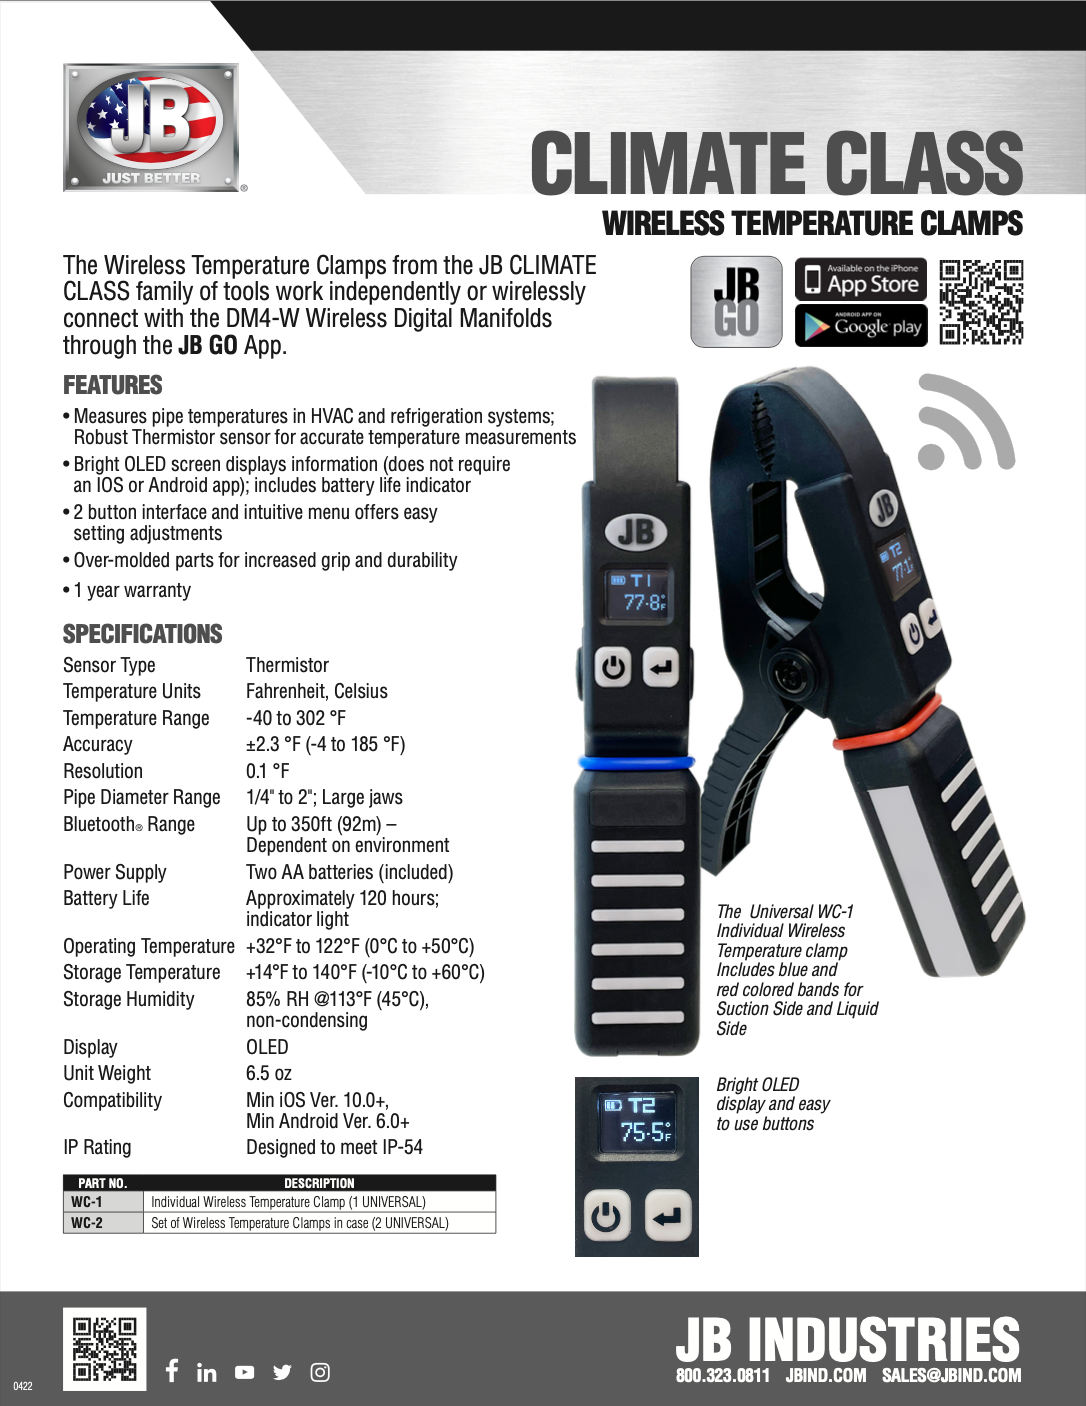 JB Industries W-2 Climate Class Wireless Temperature Clamps